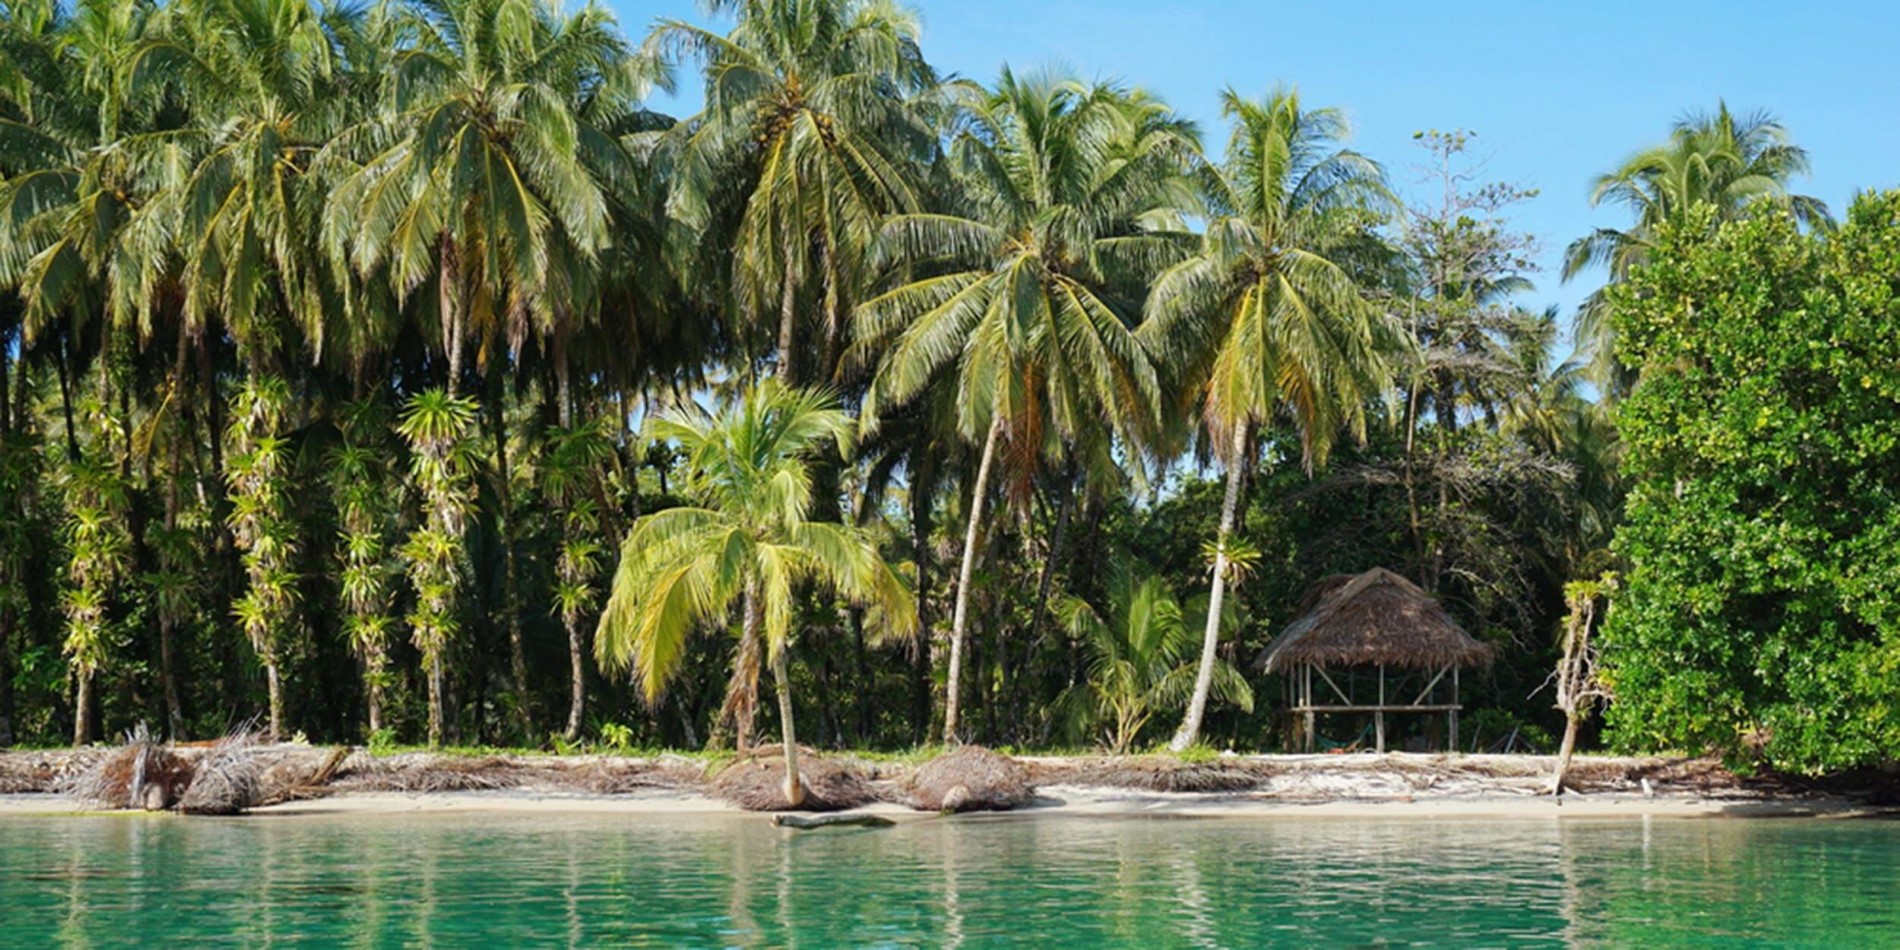 A group of palm trees next to a body of water